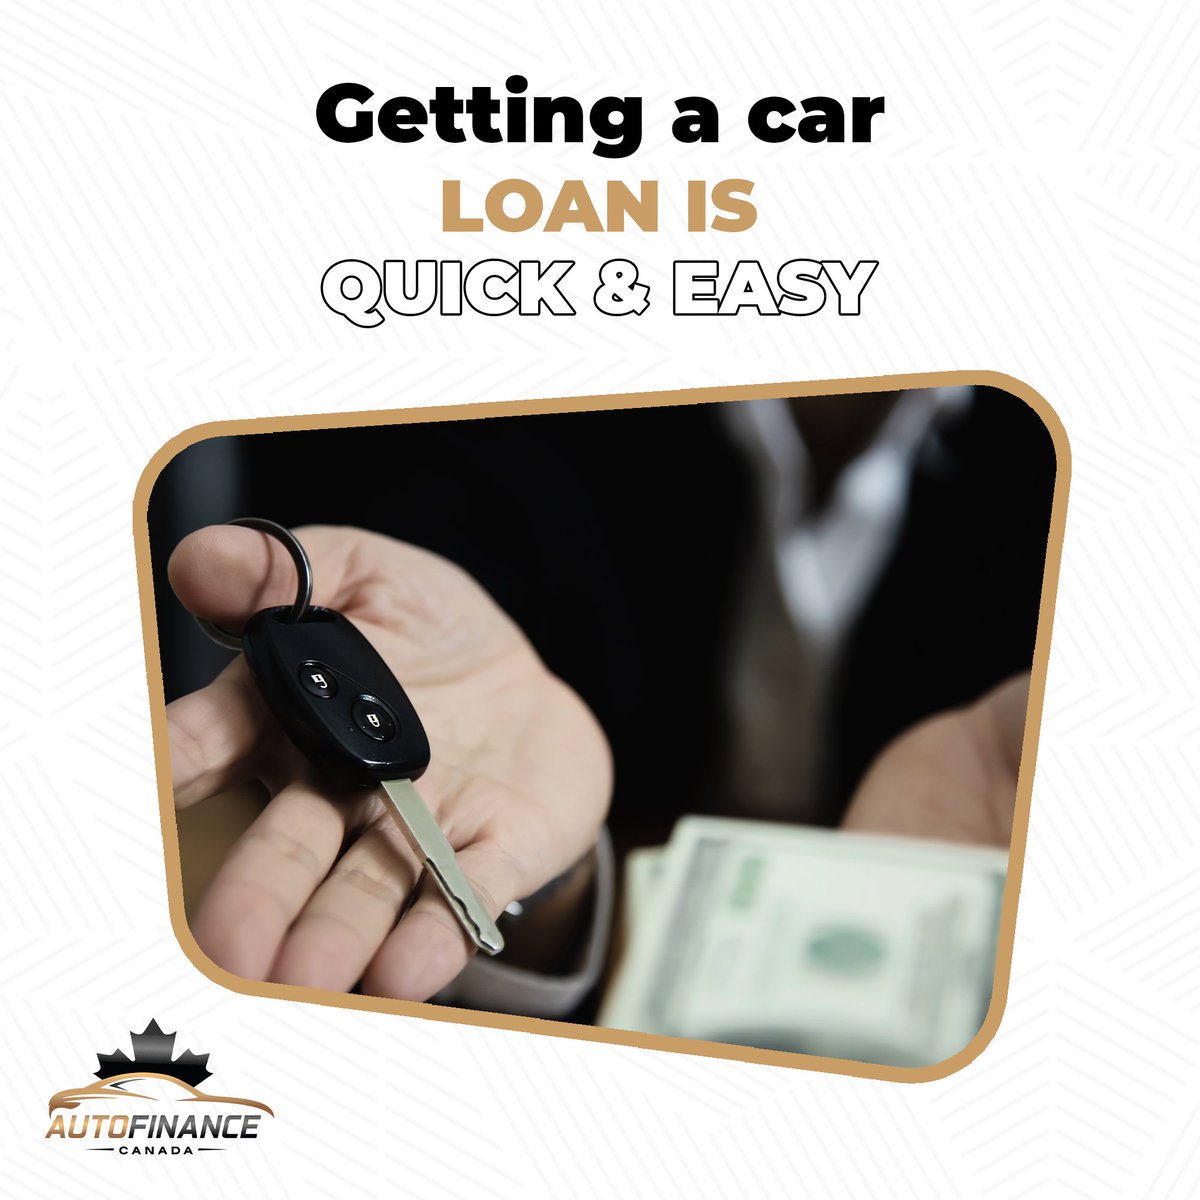 🚗 Choose your vehicle type
🚗 Choose your payment
🚗 Apply online
🚗 Drive away

#vehicle #loan #carloan #rent #rentacar #drivecars #drivecar #automobile #caroftheday #carlovers #carcollector #drive #driving #car #cars #supercars #carfinance #automotive